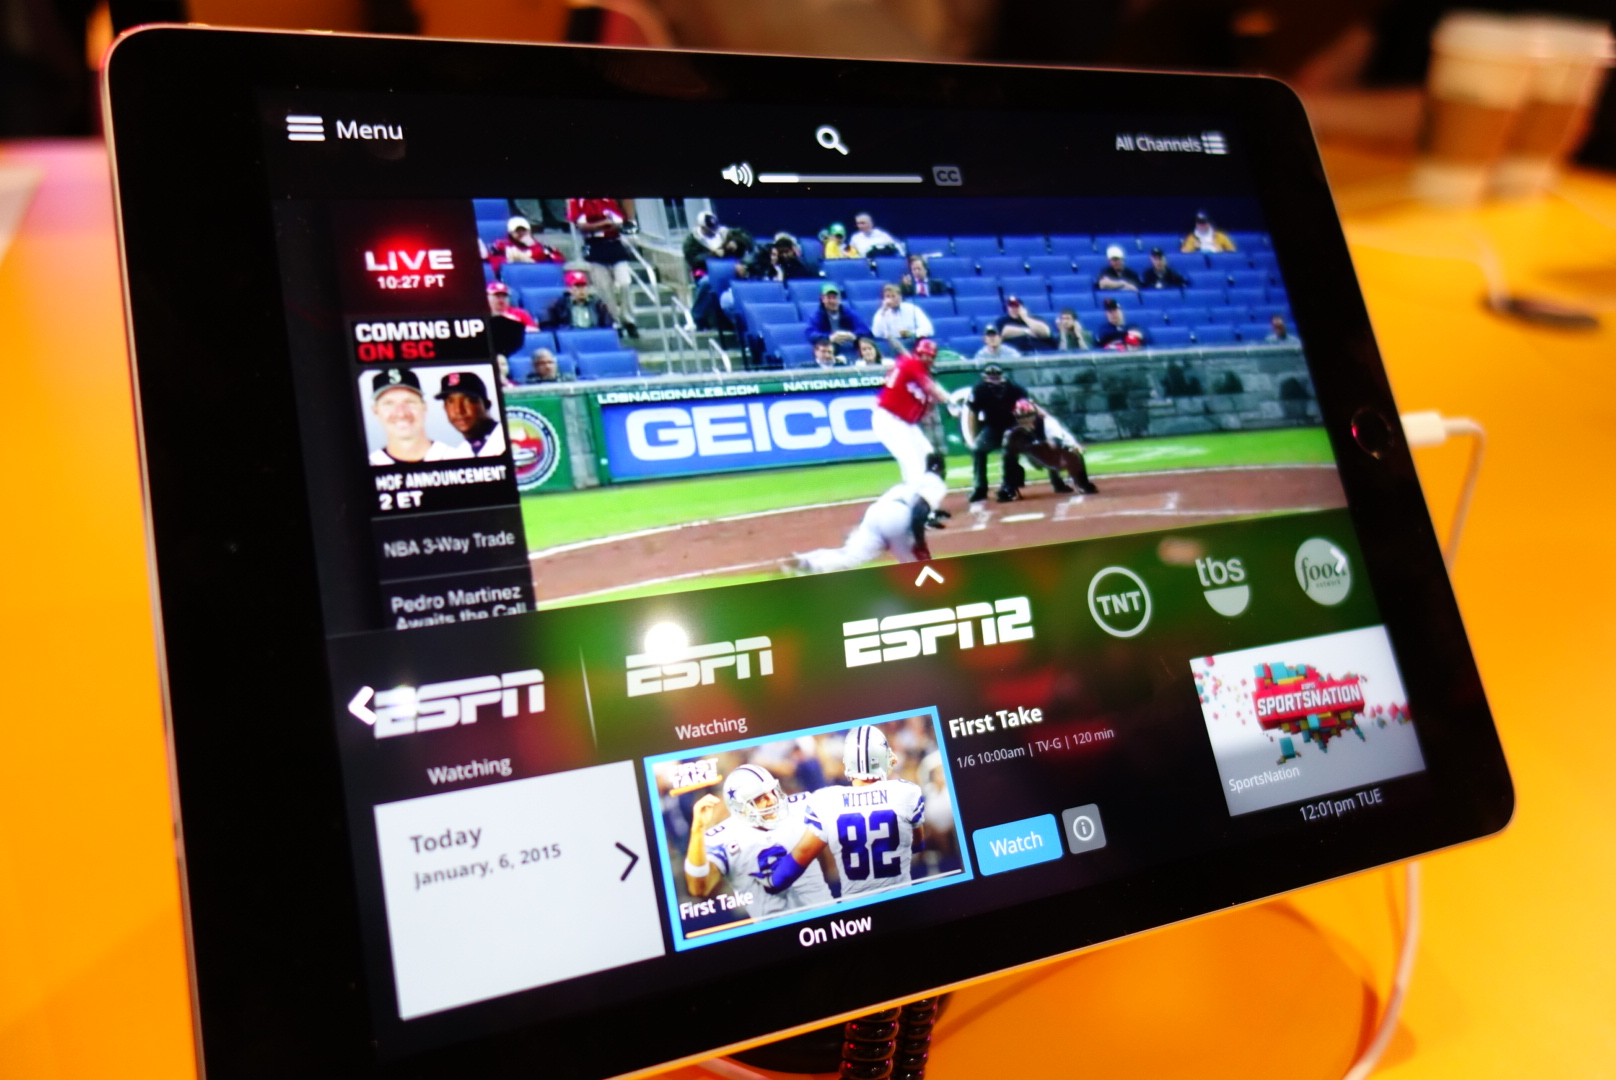 Hands-On With Dish’s Sling TV Streaming Service. Is It Worth The $20?